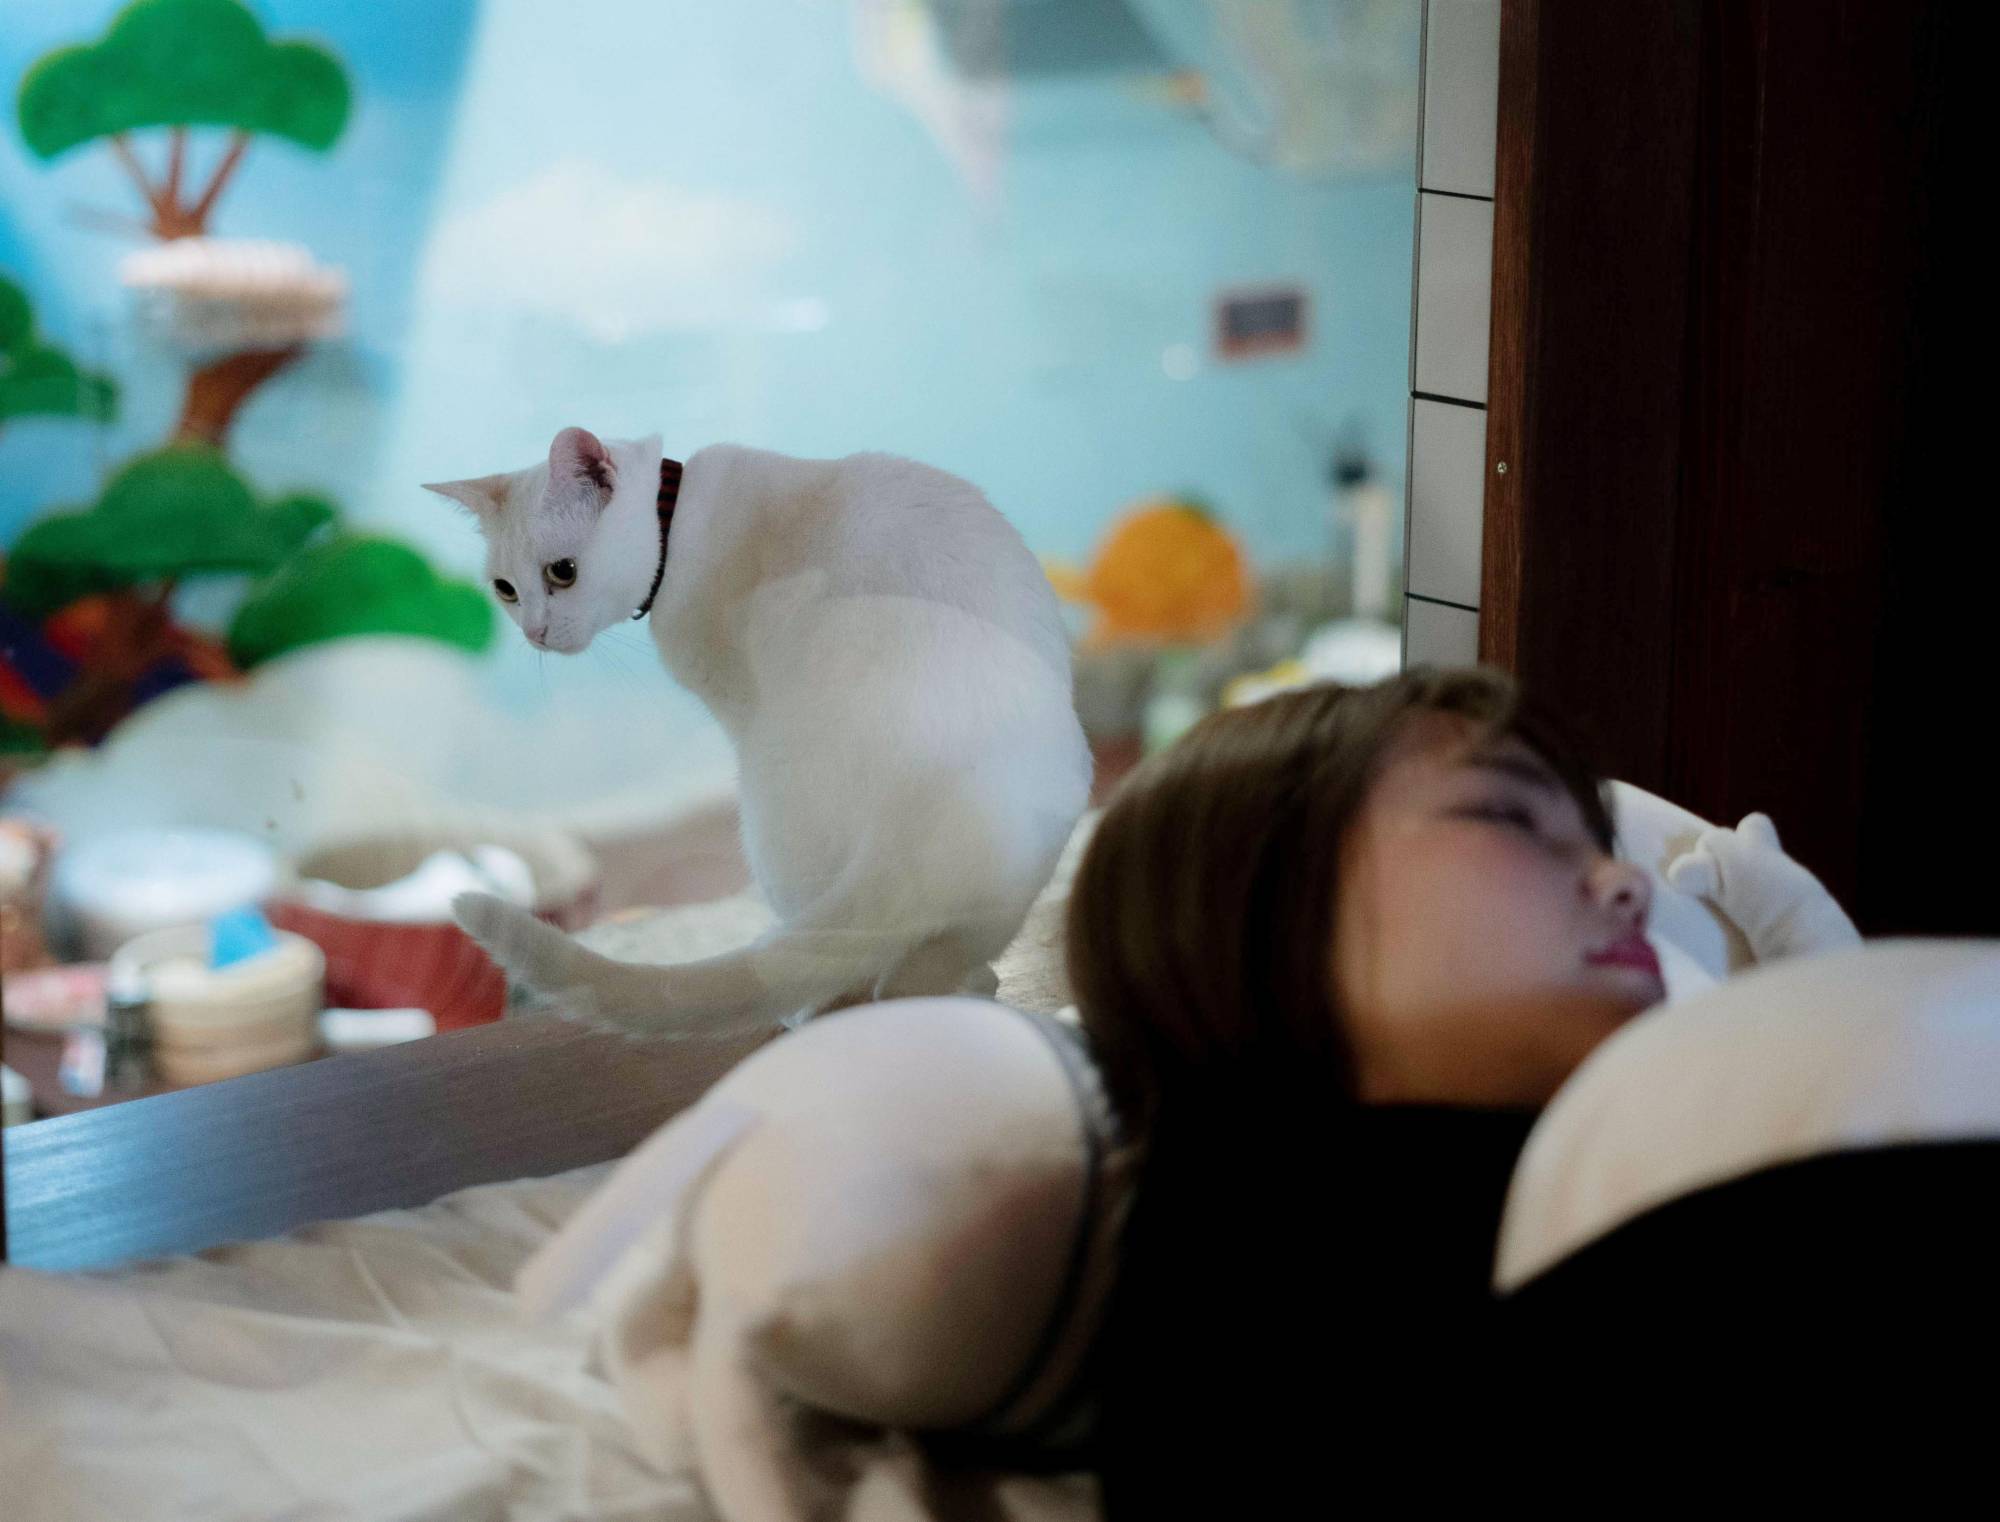 A window next to their bed enables guests of the hostel to fall asleep while gazing at its resident cats. | KYODO